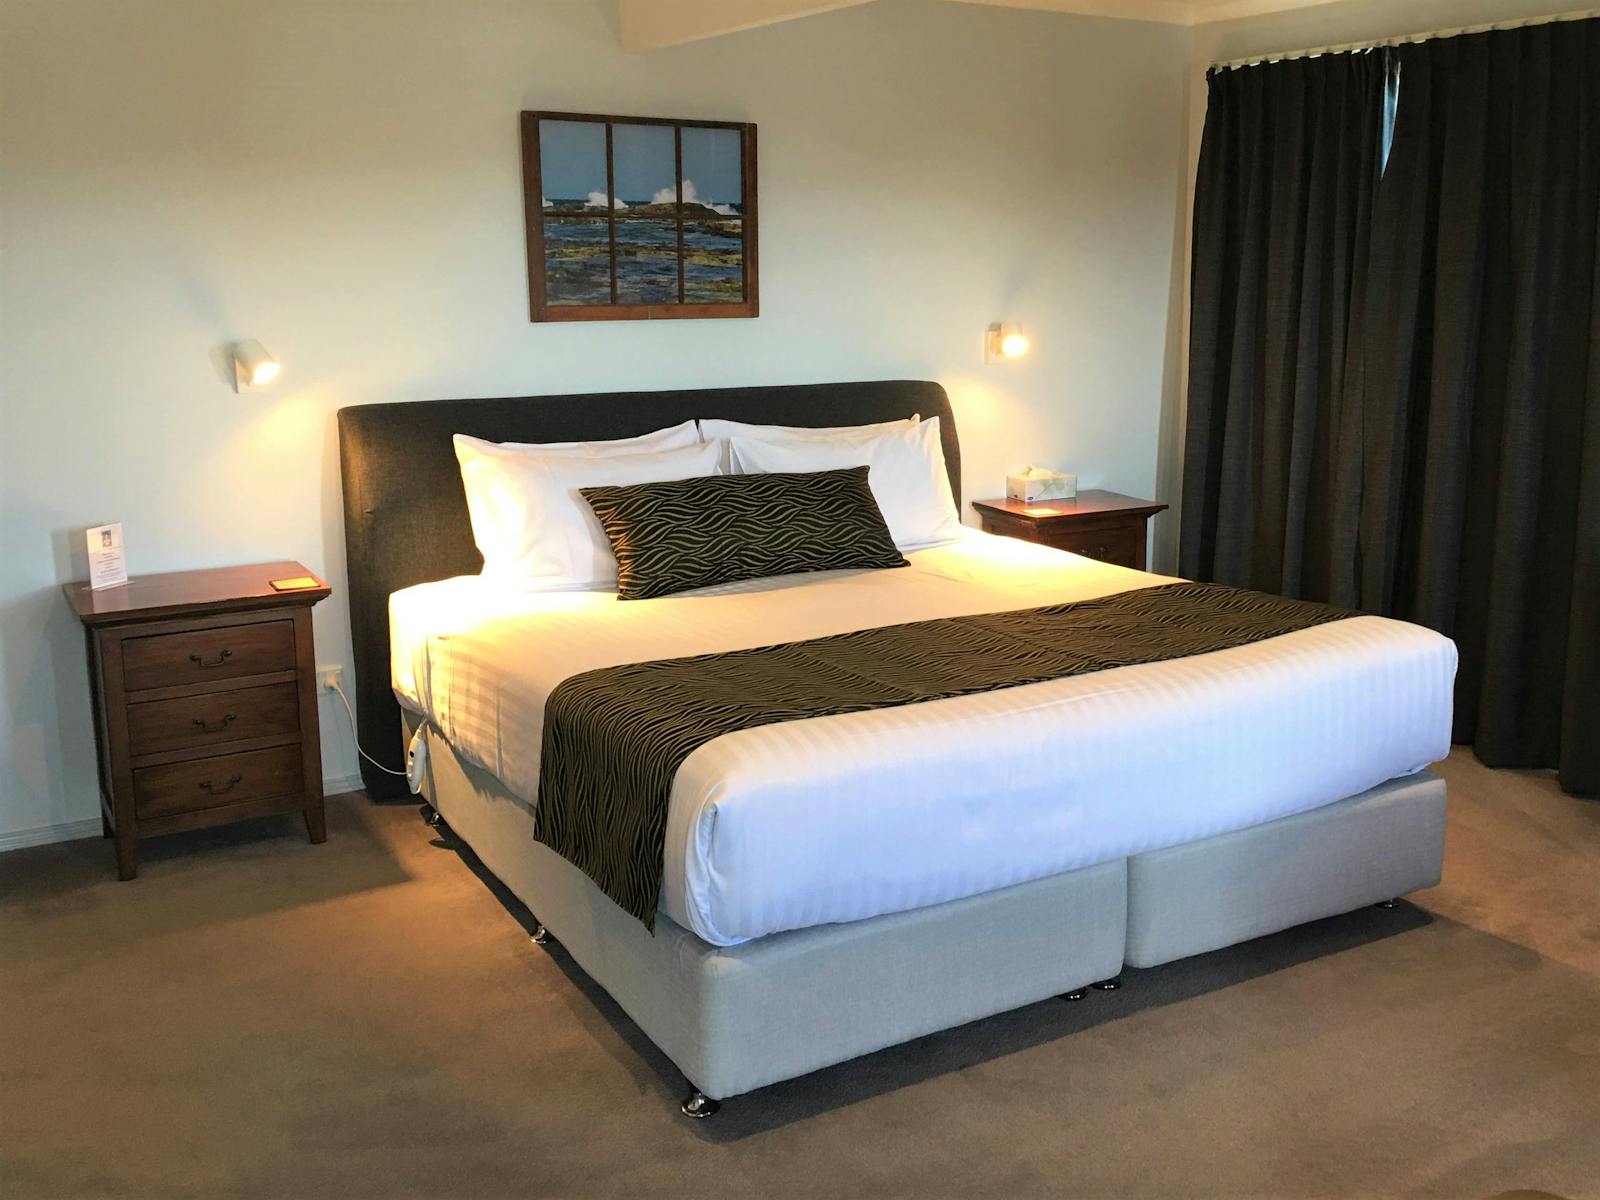 The Acacia room is a lovely big room with a super comfortable king bed and lots of space to move.